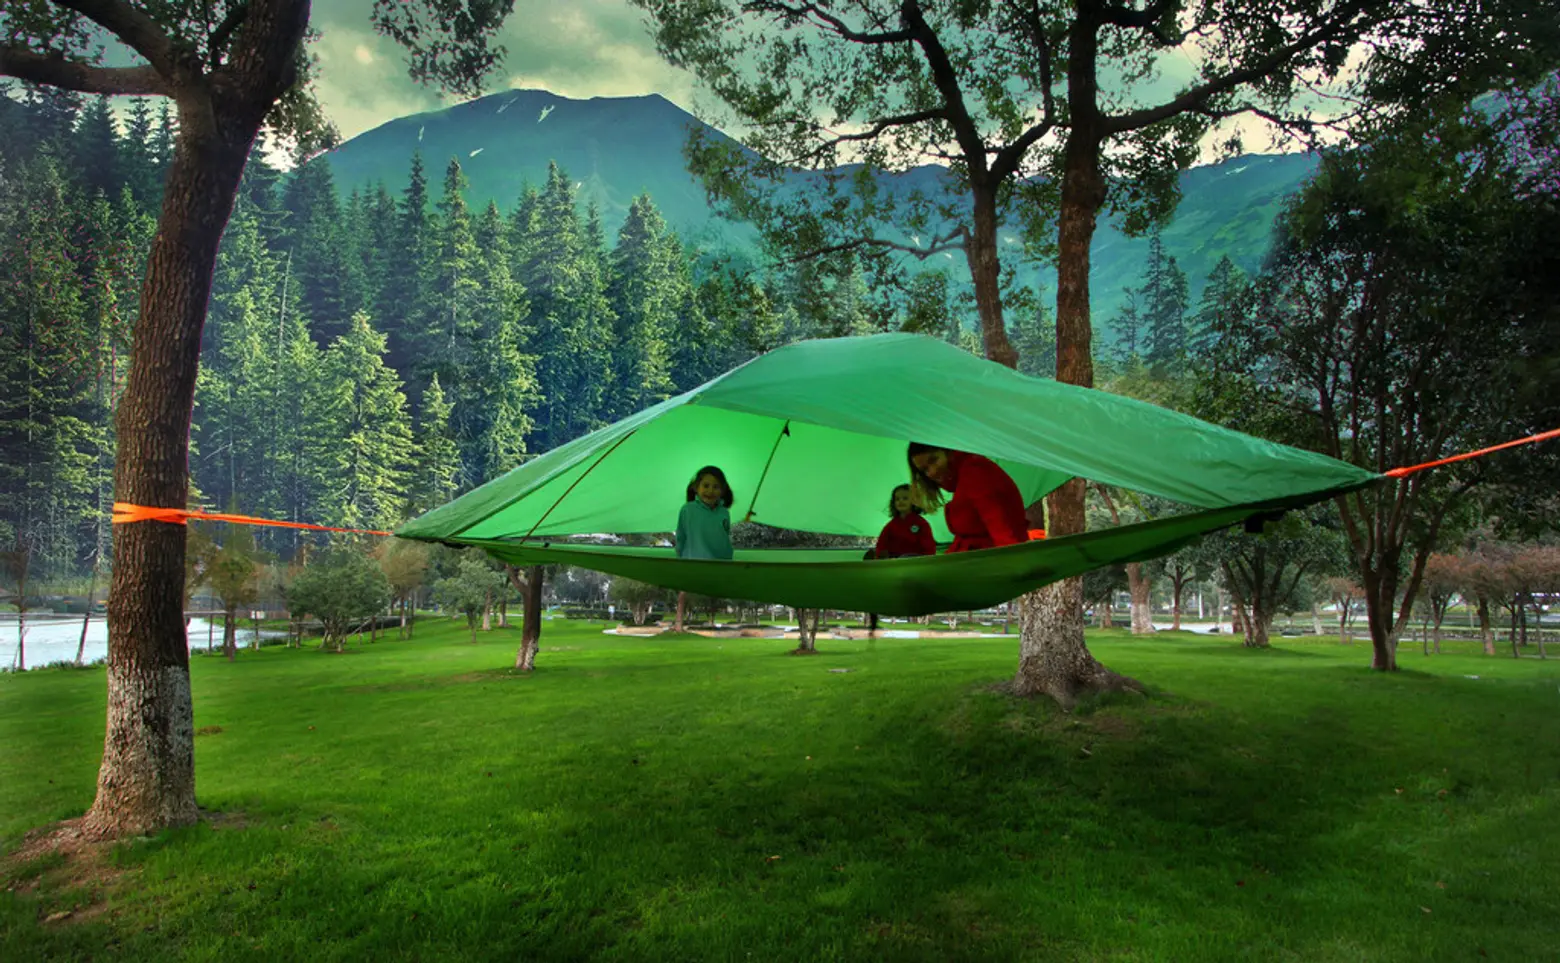 This Suspended Tent Gives New Meaning to “Sleeping Among the Trees”